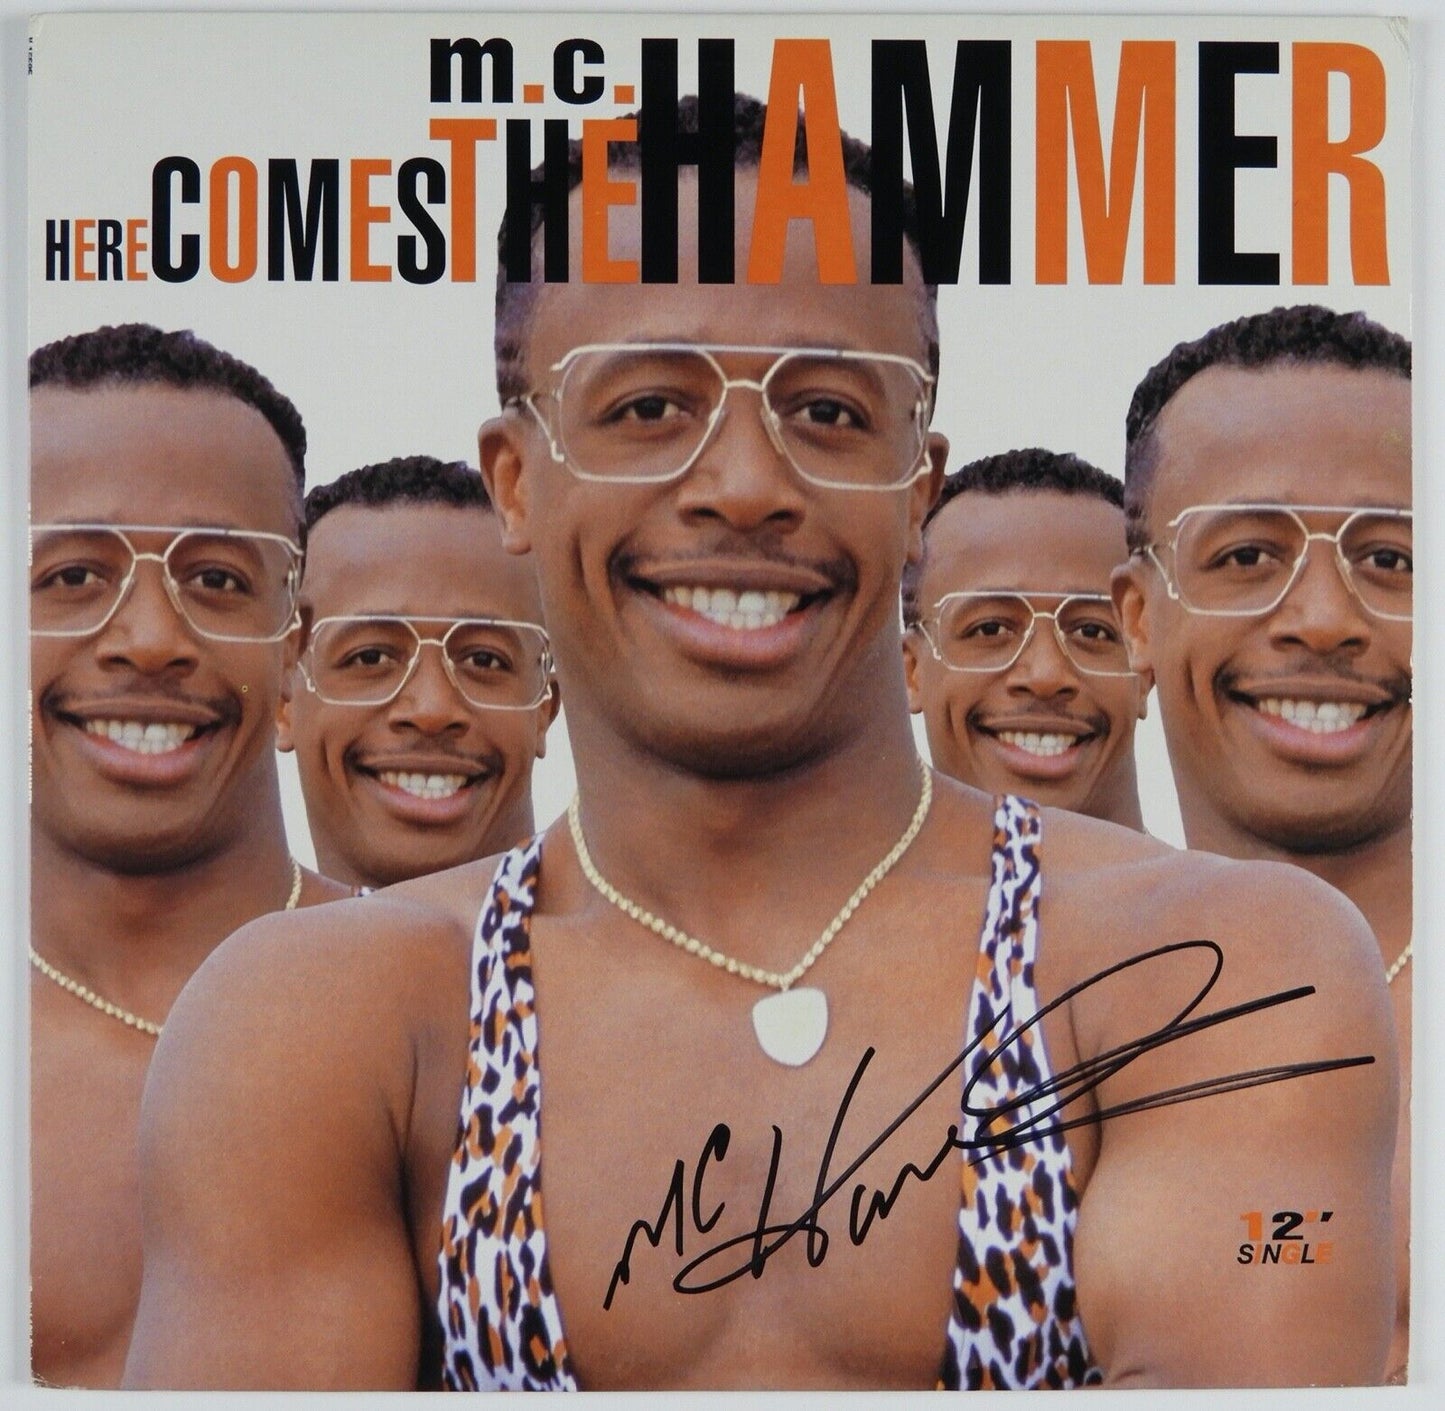 MC Hammer Signed Autograph Record JSA COA Here Comes The Hammer 12"